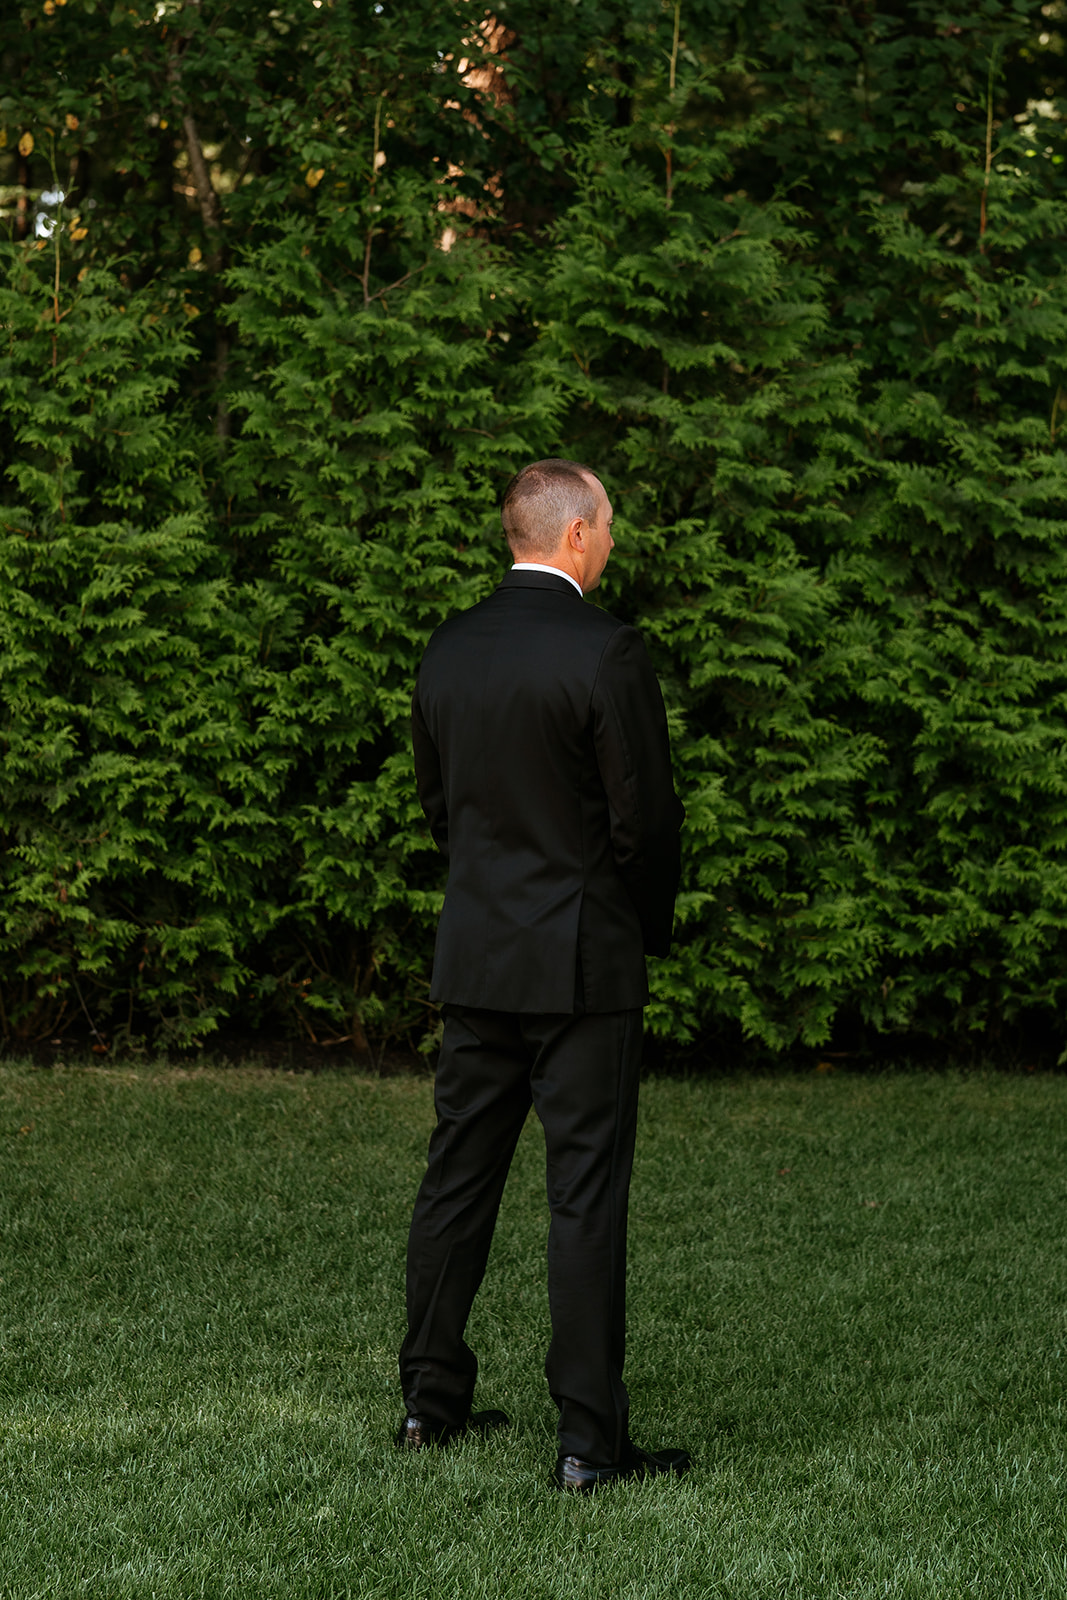 A groom in black suit standing with his back to the camera facing a dense green background waiting to see his bride during a first look.